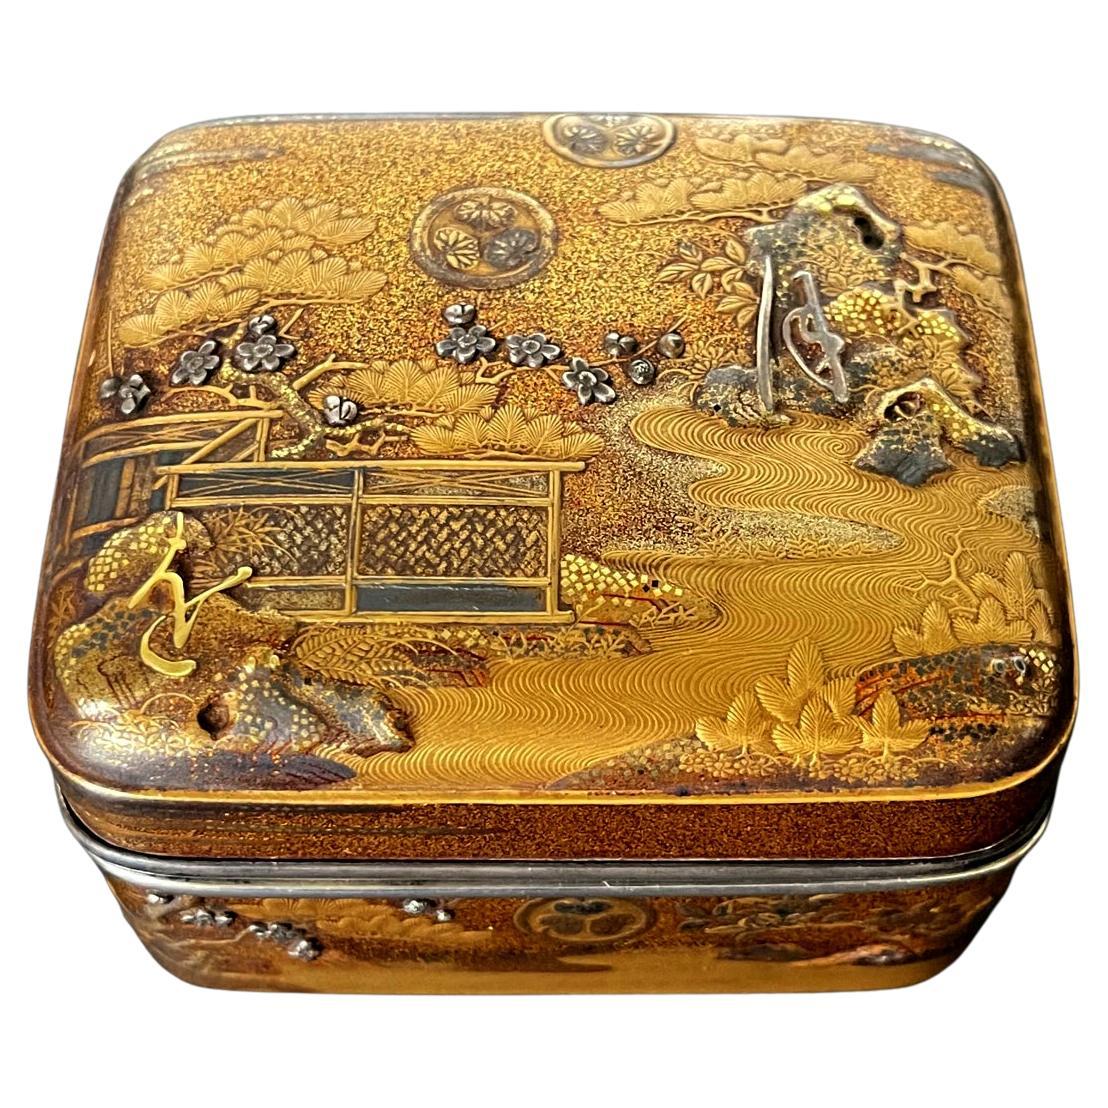 Antique Japanese Lacquer Kobako with Silver Inlays Edo Period